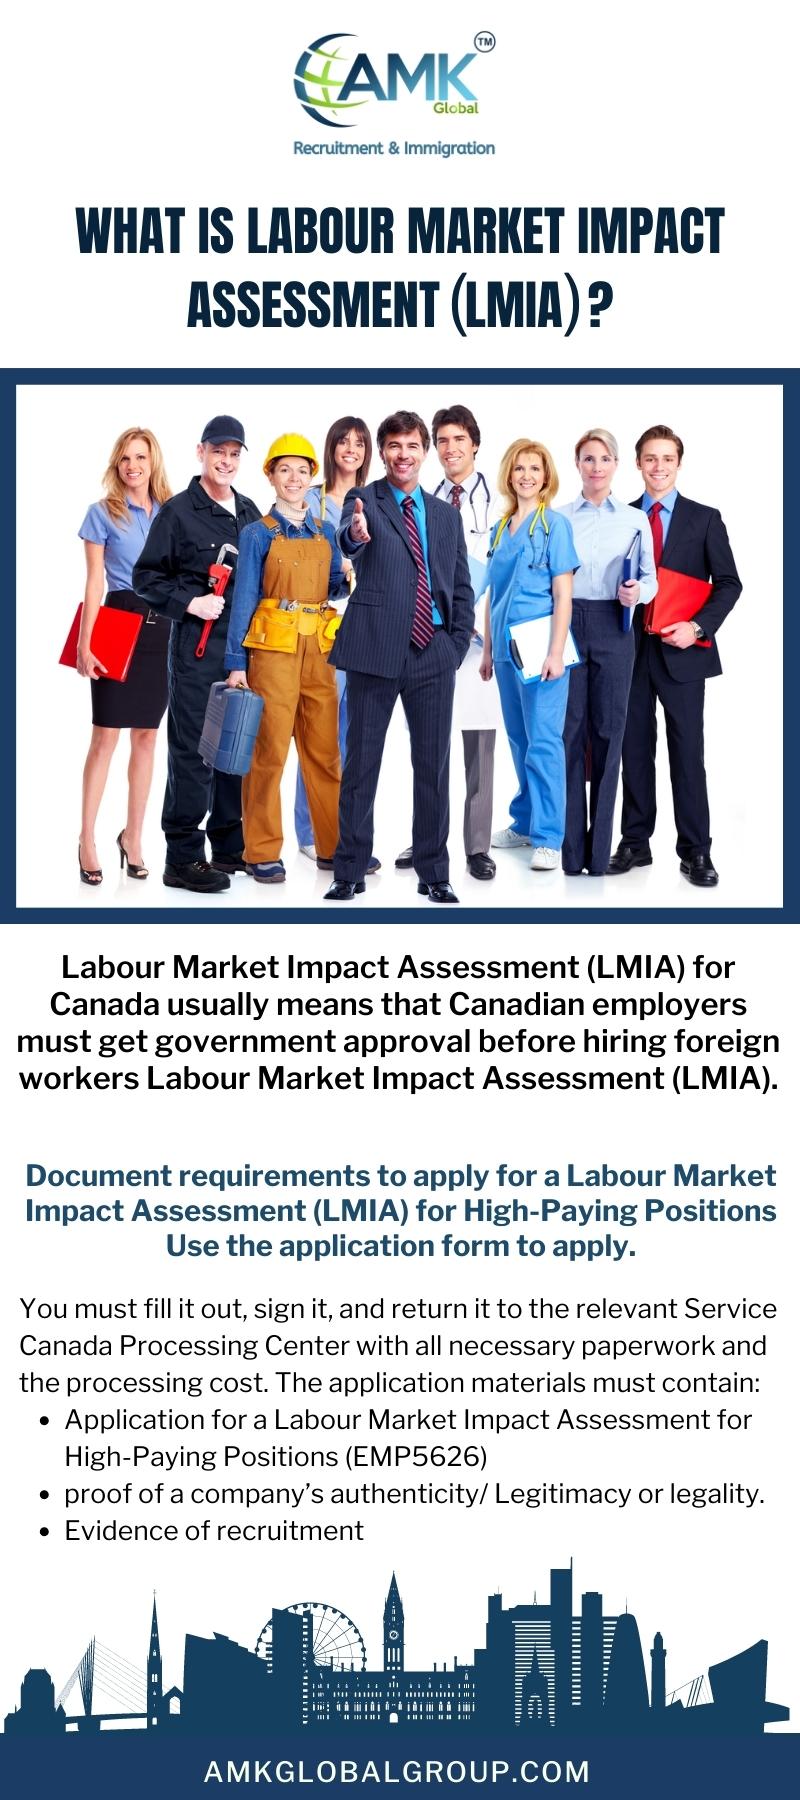 What is a Labour Market Impact AssessmentServicesLawyers - AdvocatesAll Indiaother